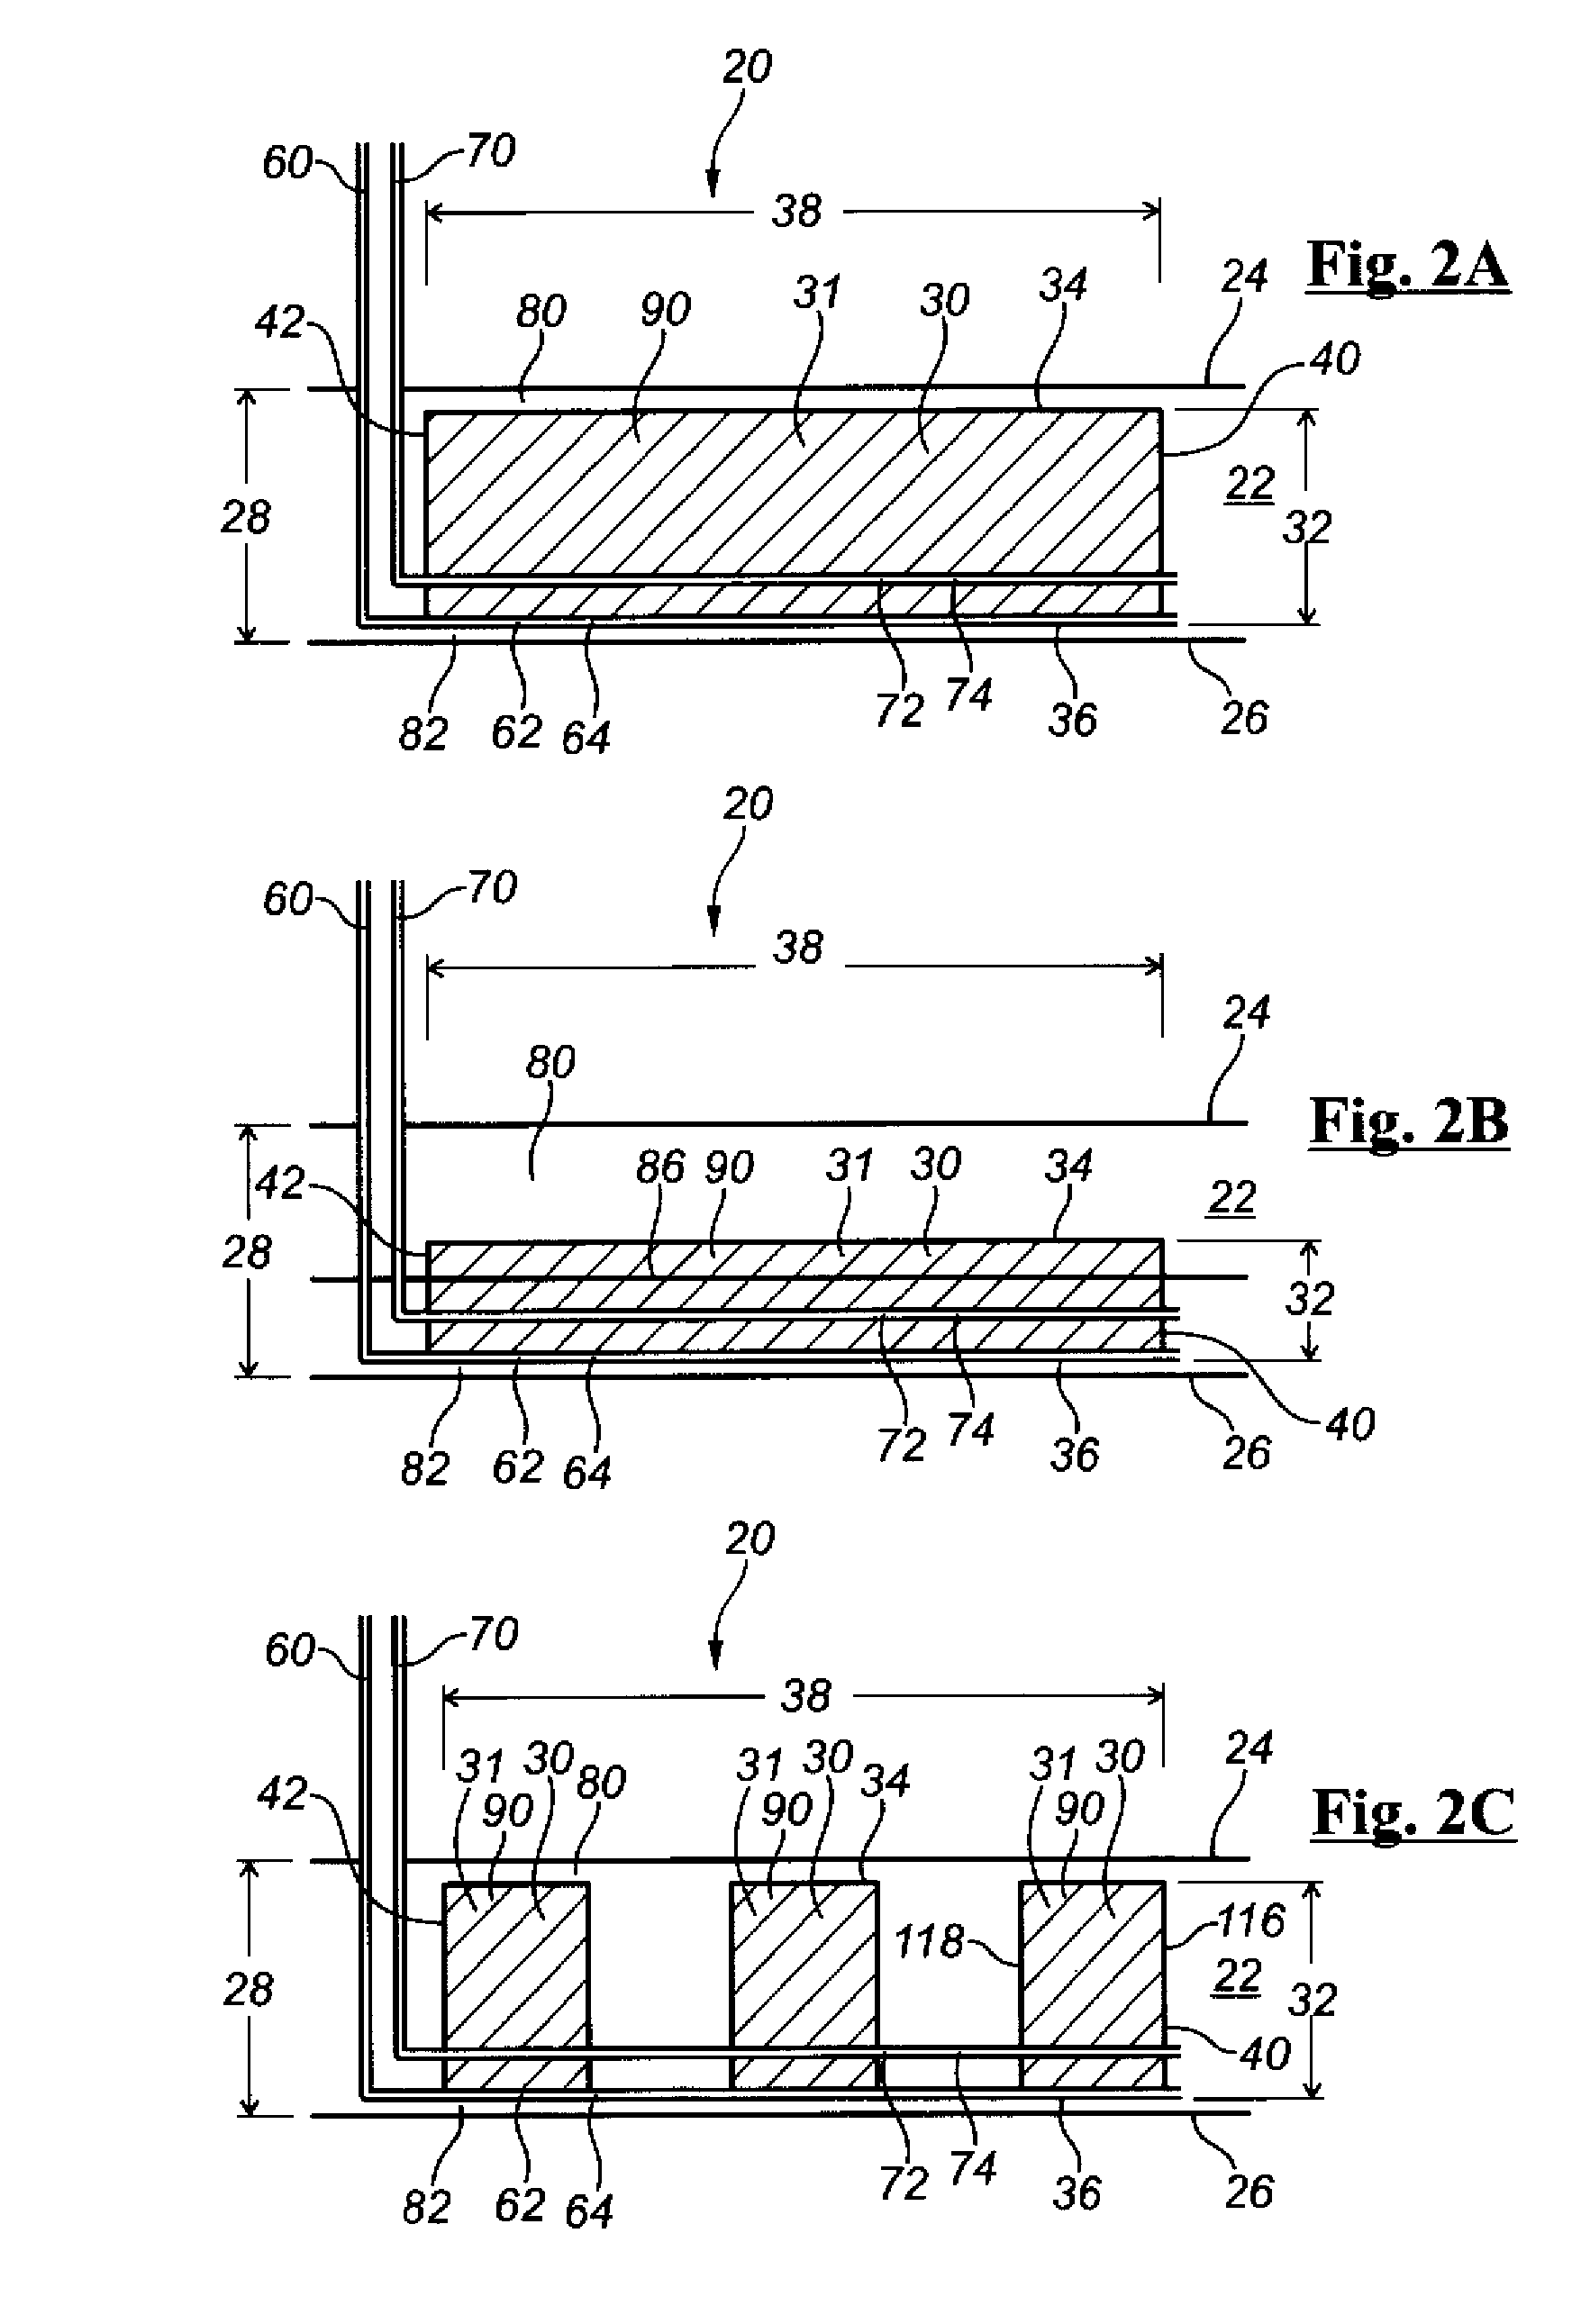 Enhanced permeability subterranean fluid recovery system and methods